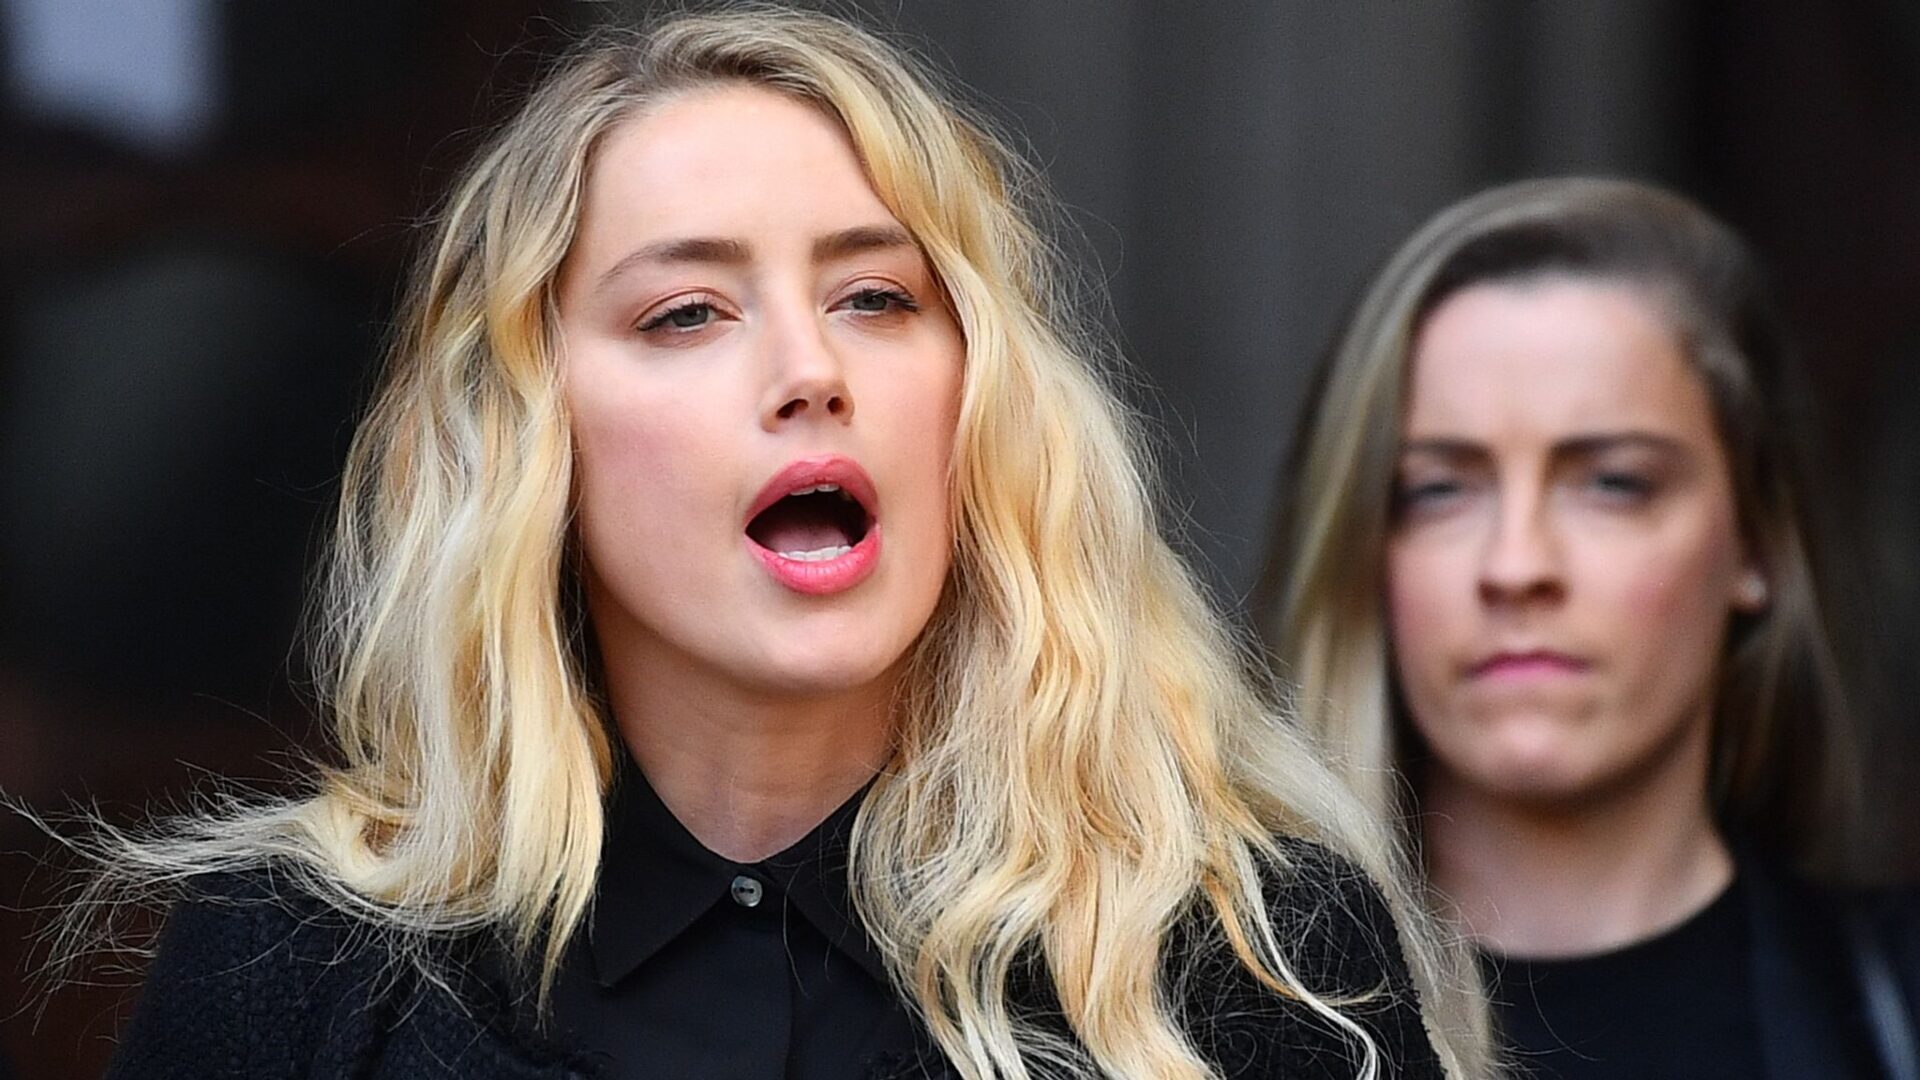 JUST IN: Amber Heard Settles Defamation Case With Johnny Depp